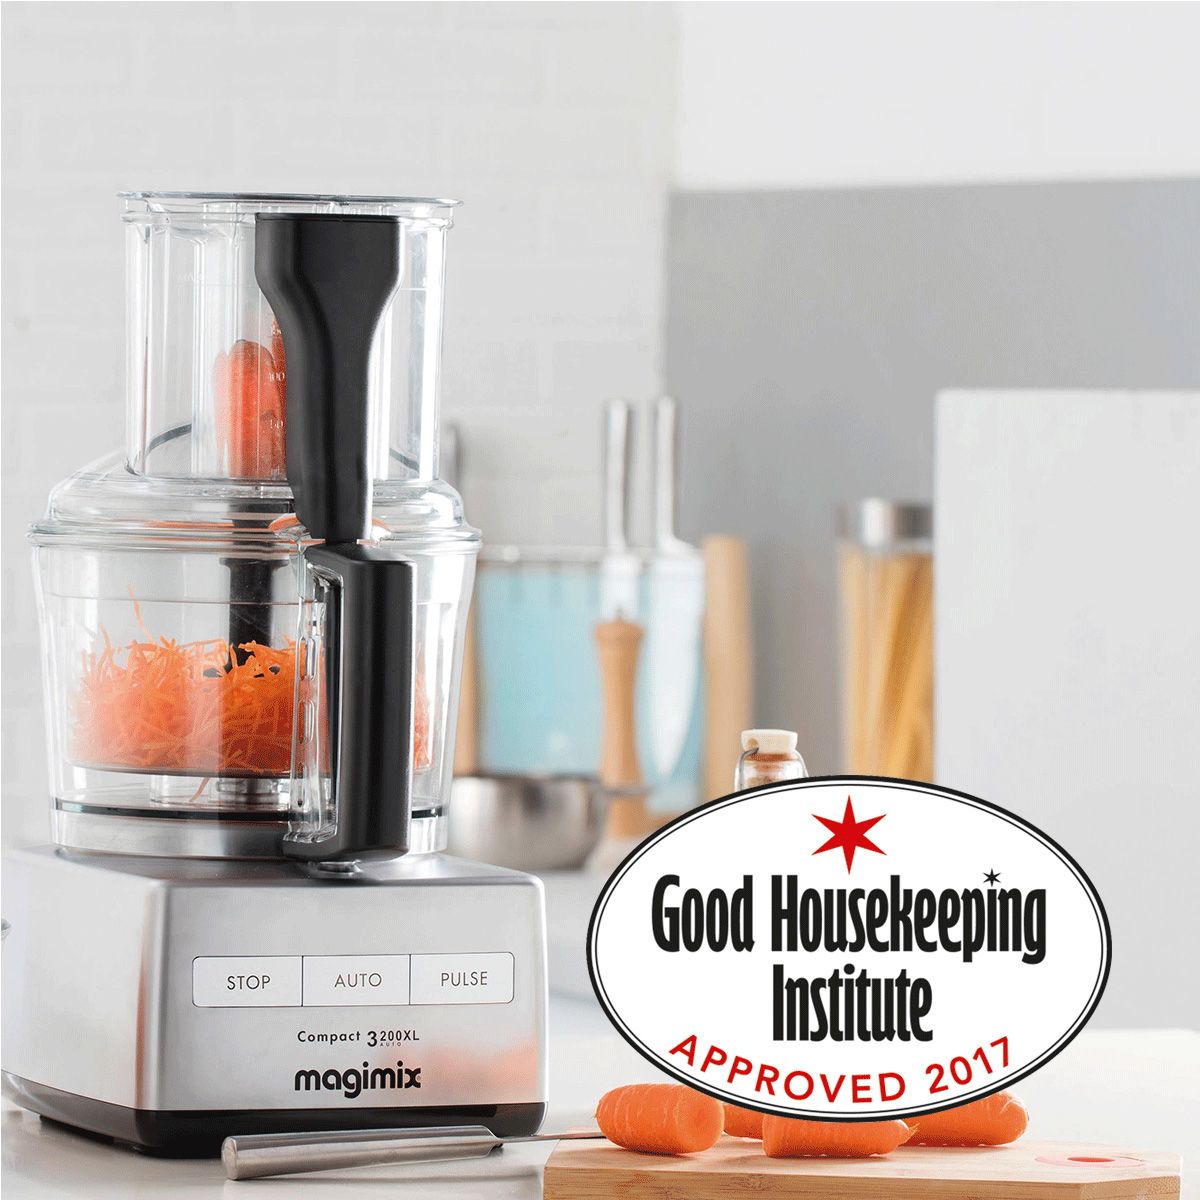 Blender, Food processor, Product, Small appliance, Orange, Kitchen appliance, Home appliance, 